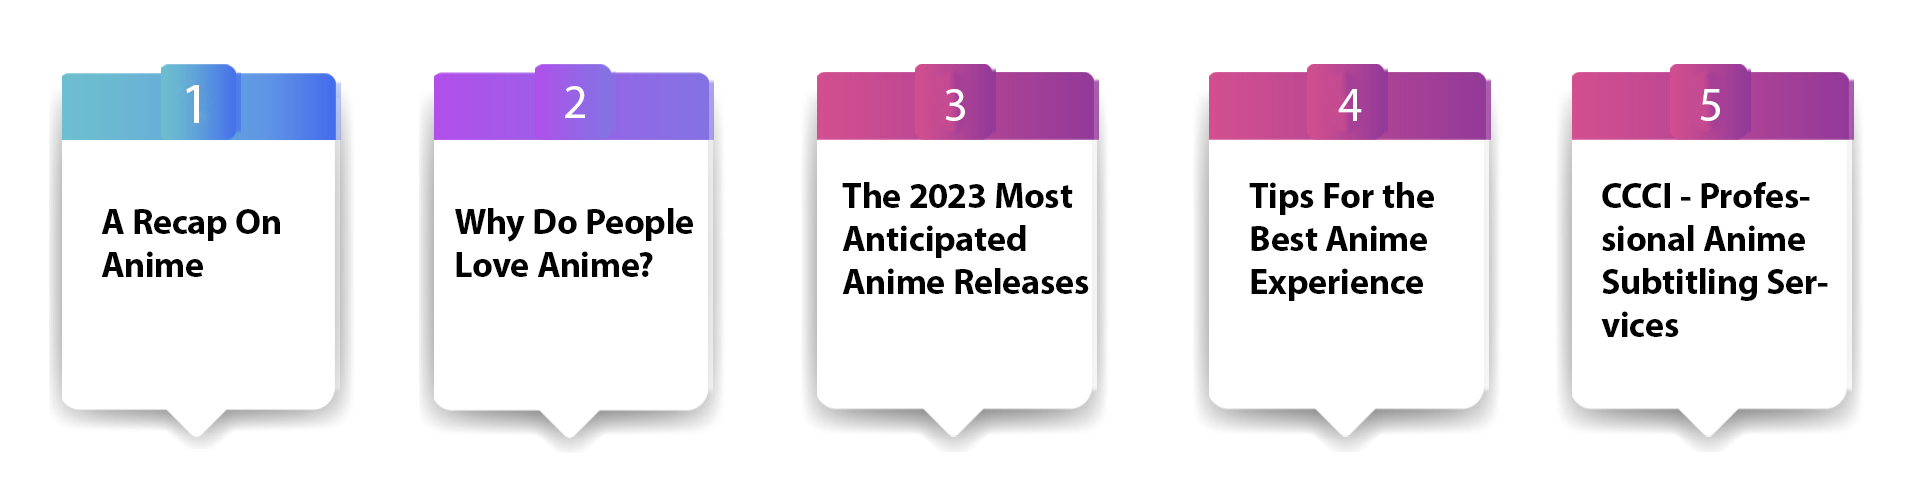 5 Most-Anticipated Anime Coming Back in 2023